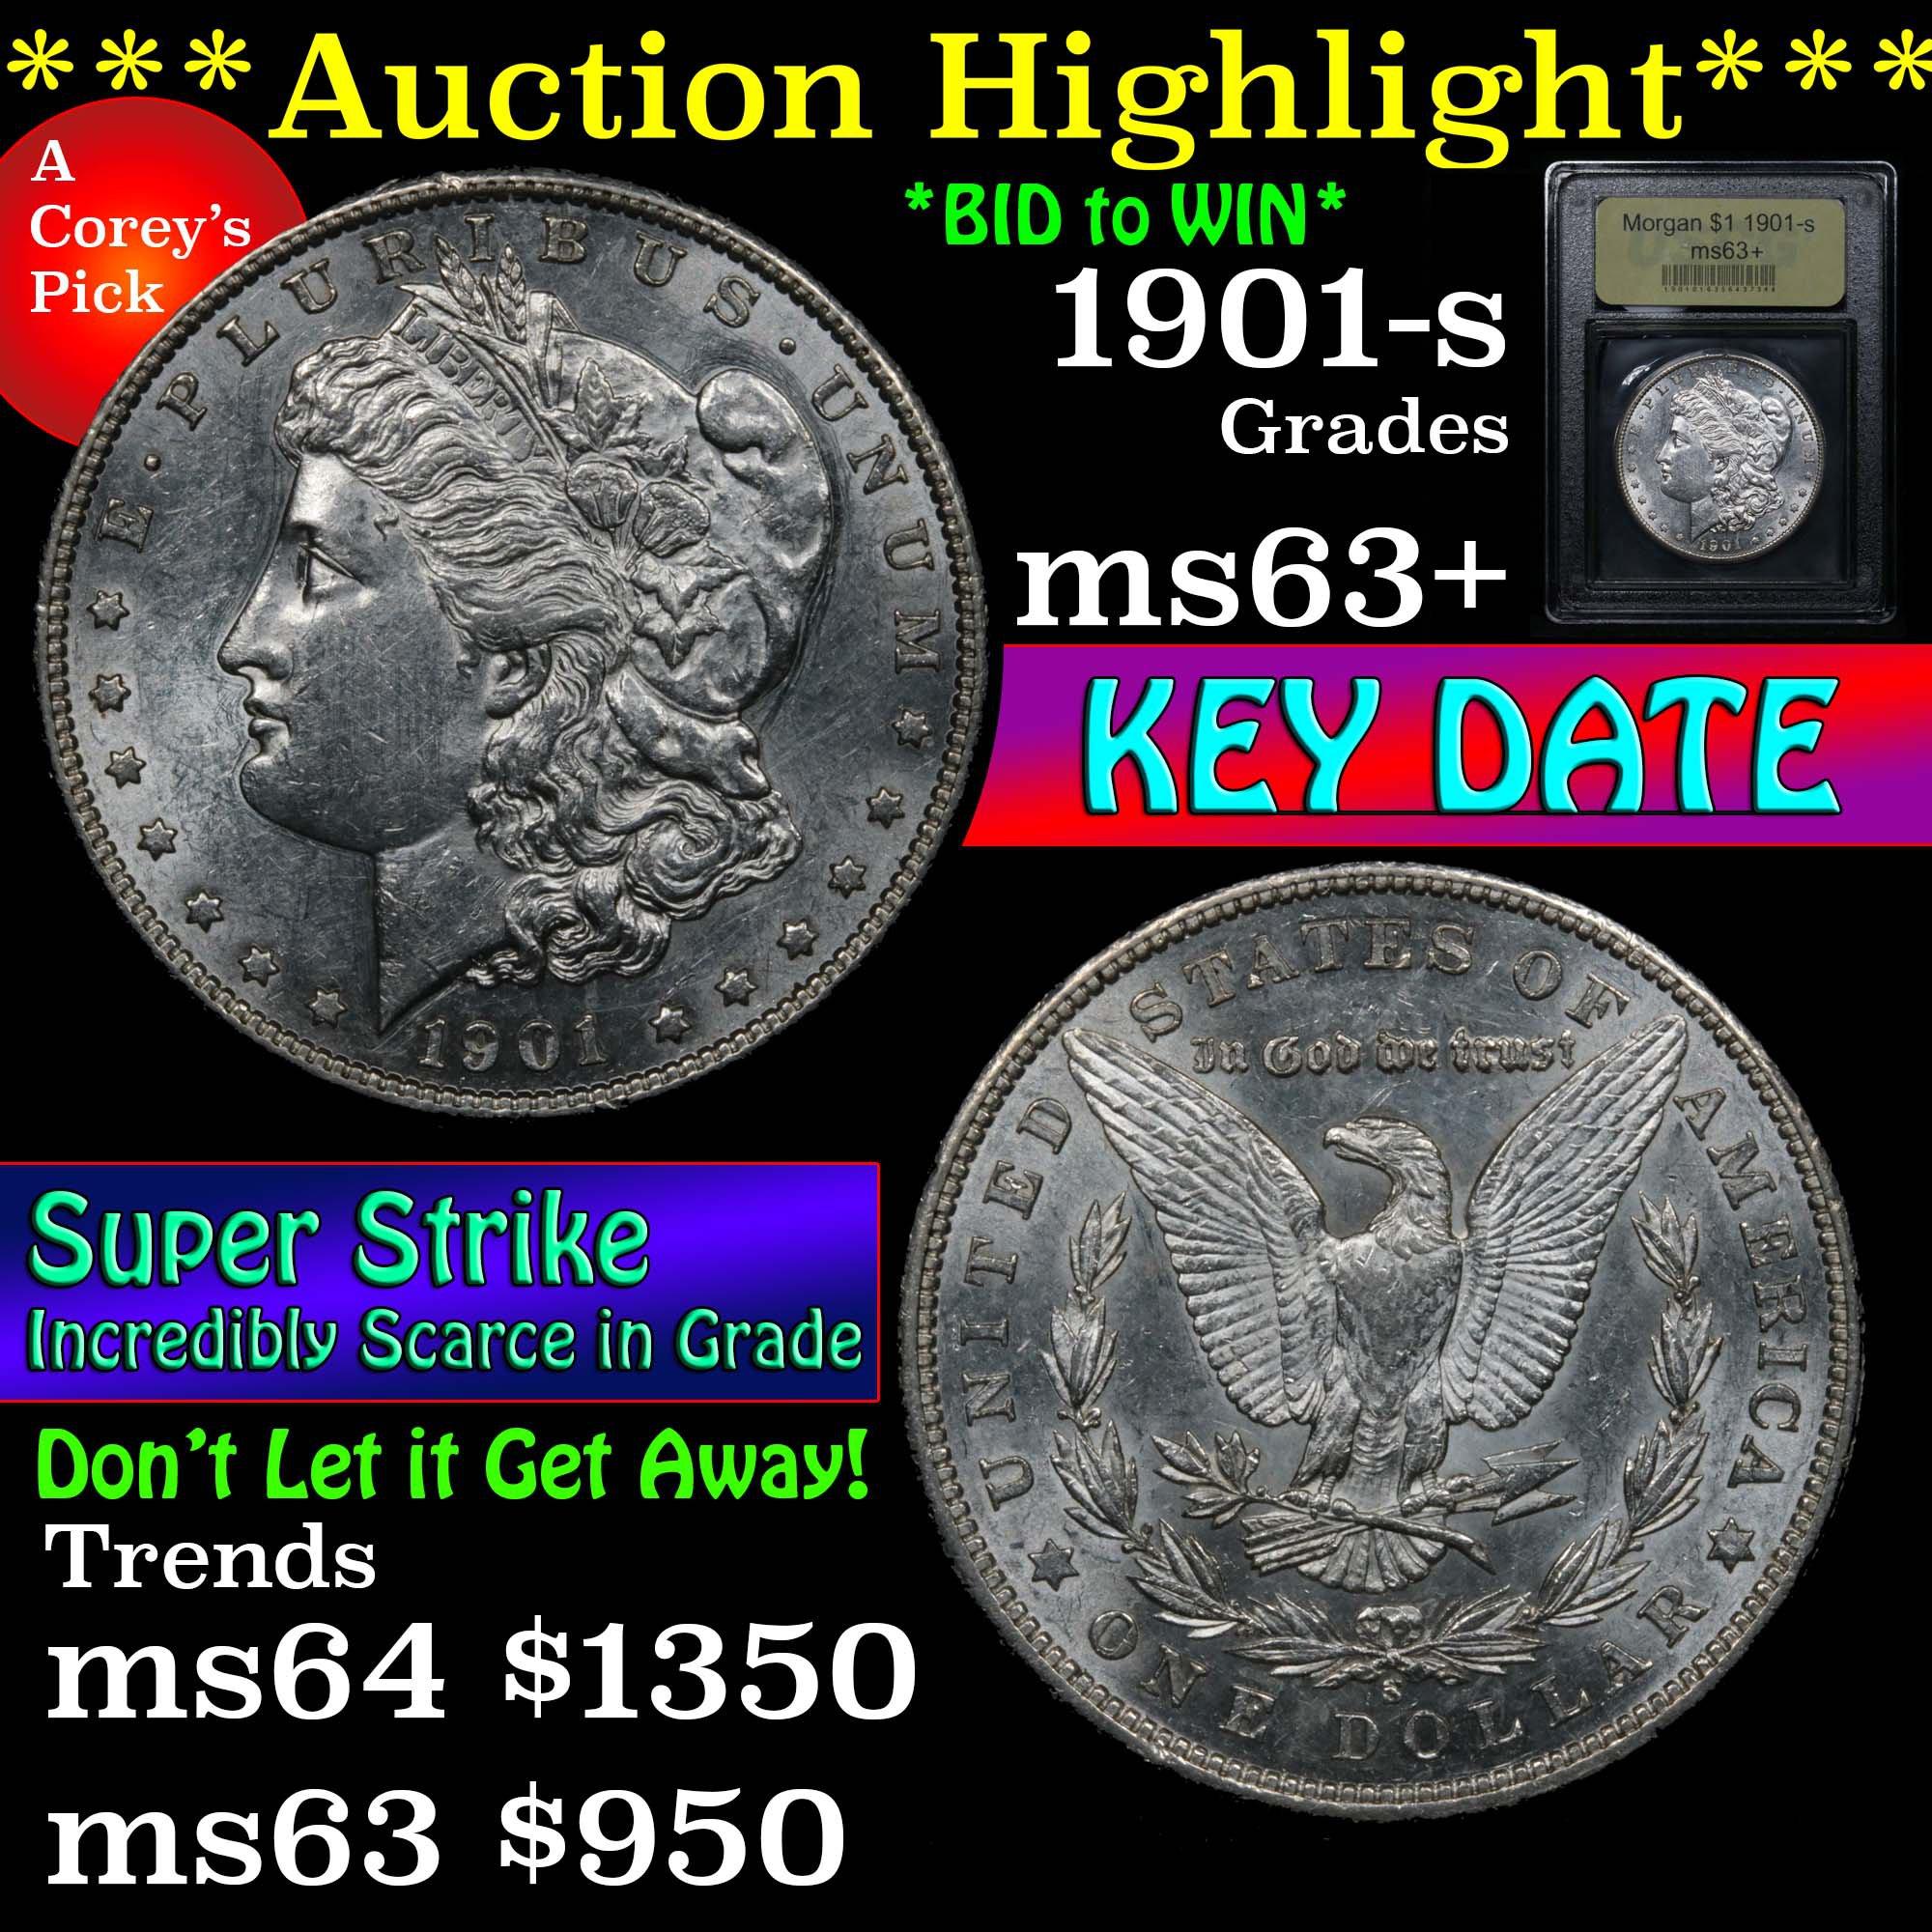 ***Auction Highlight*** 1901-s Morgan Dollar $1 Graded Select+ Unc By USCG (fc)